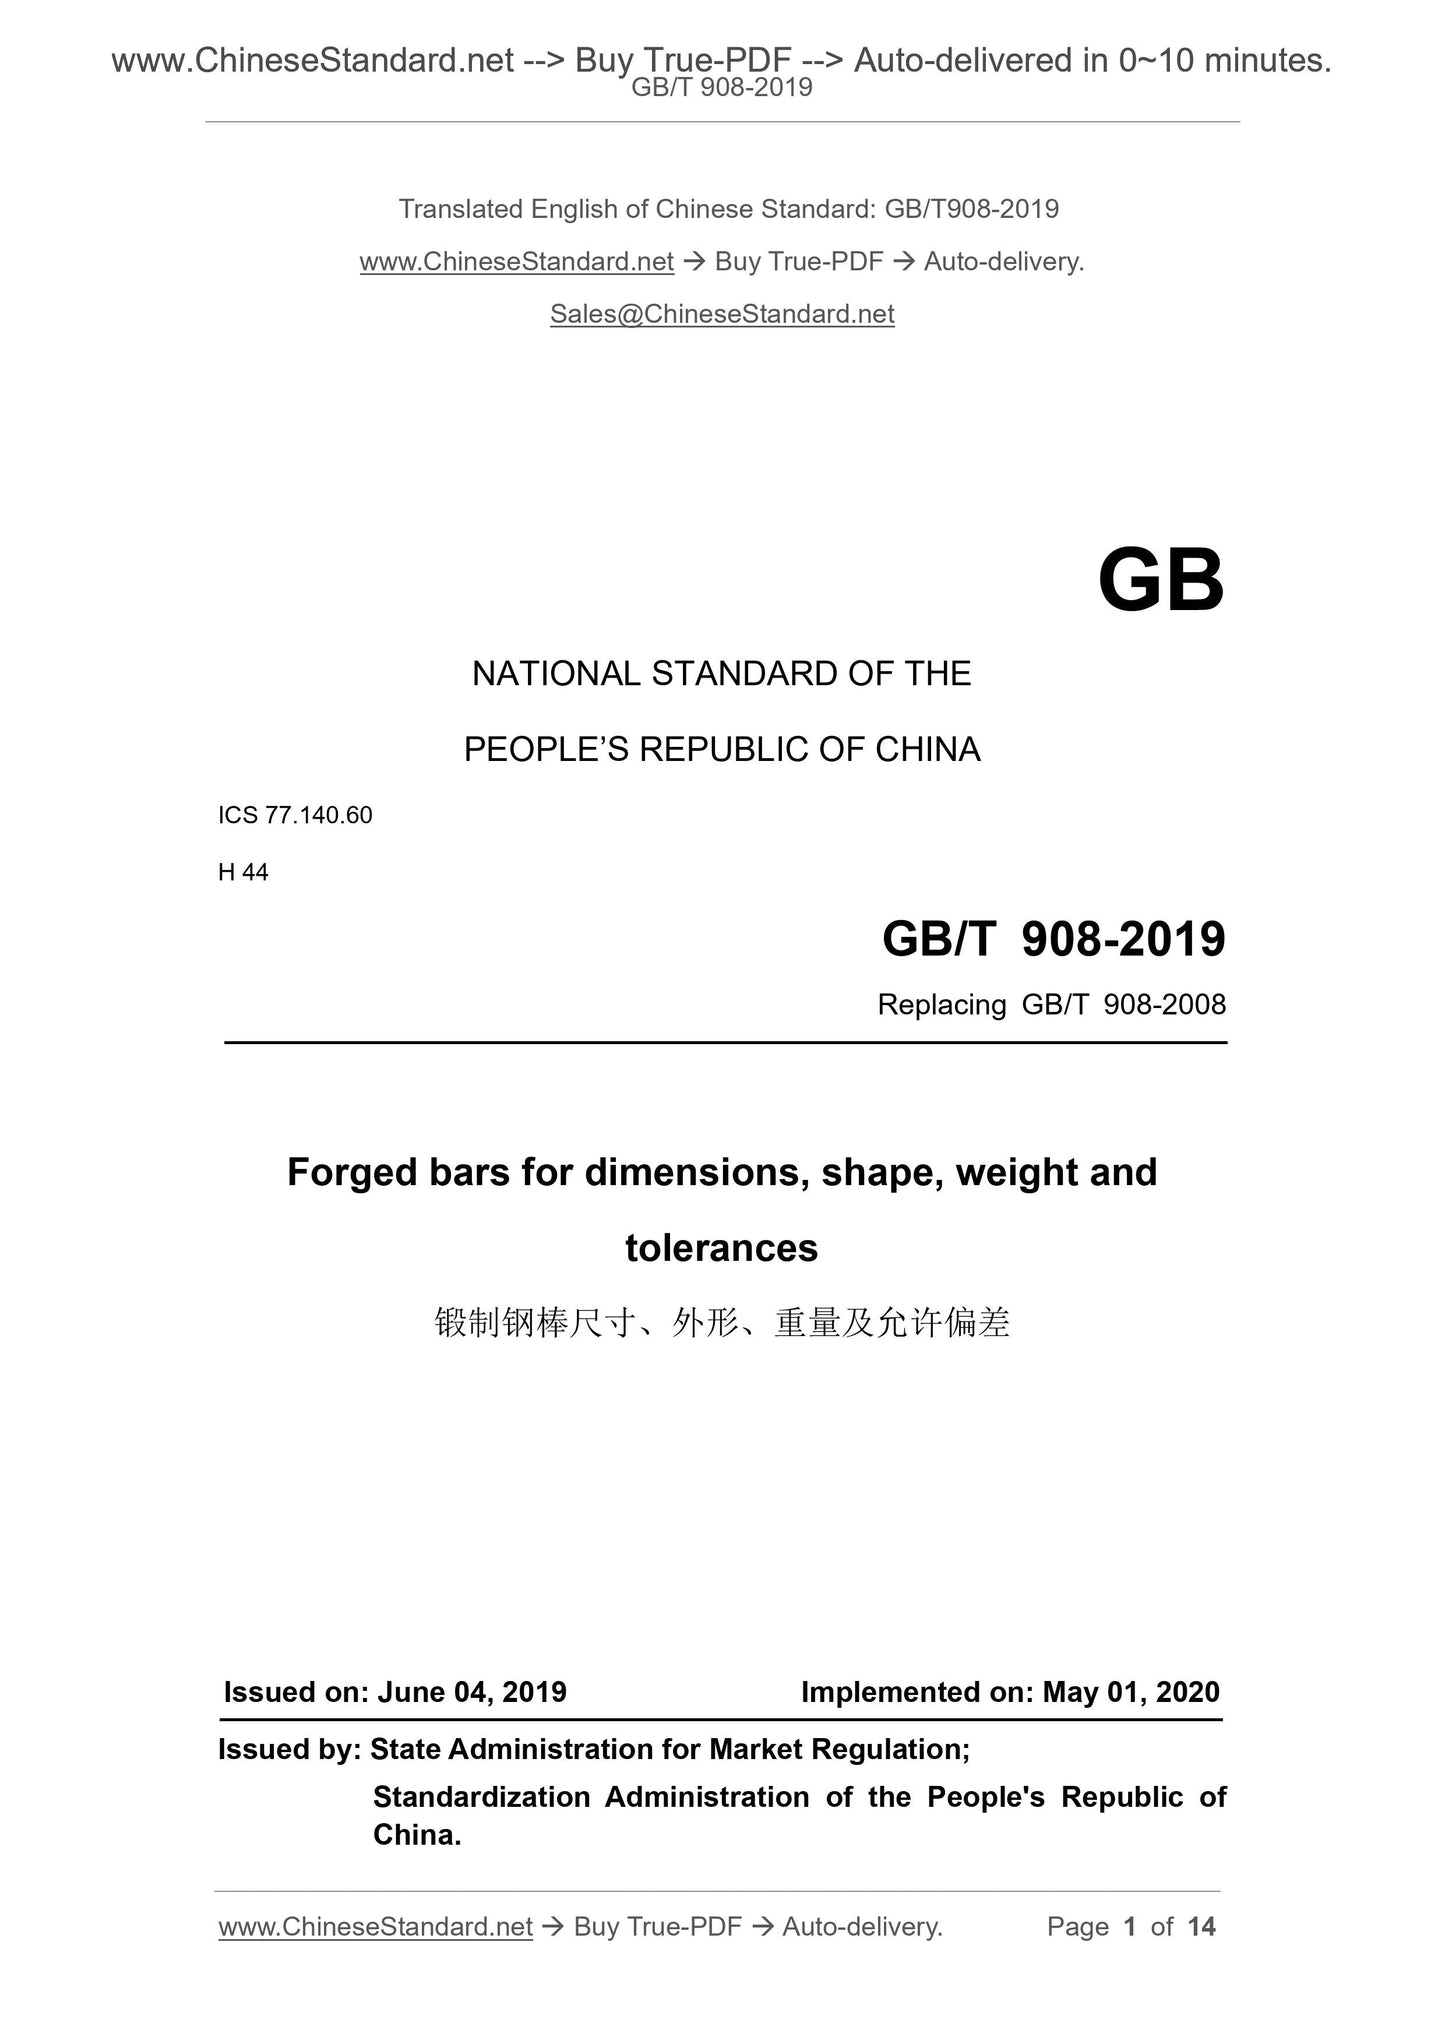 GB/T 908-2019 Page 1